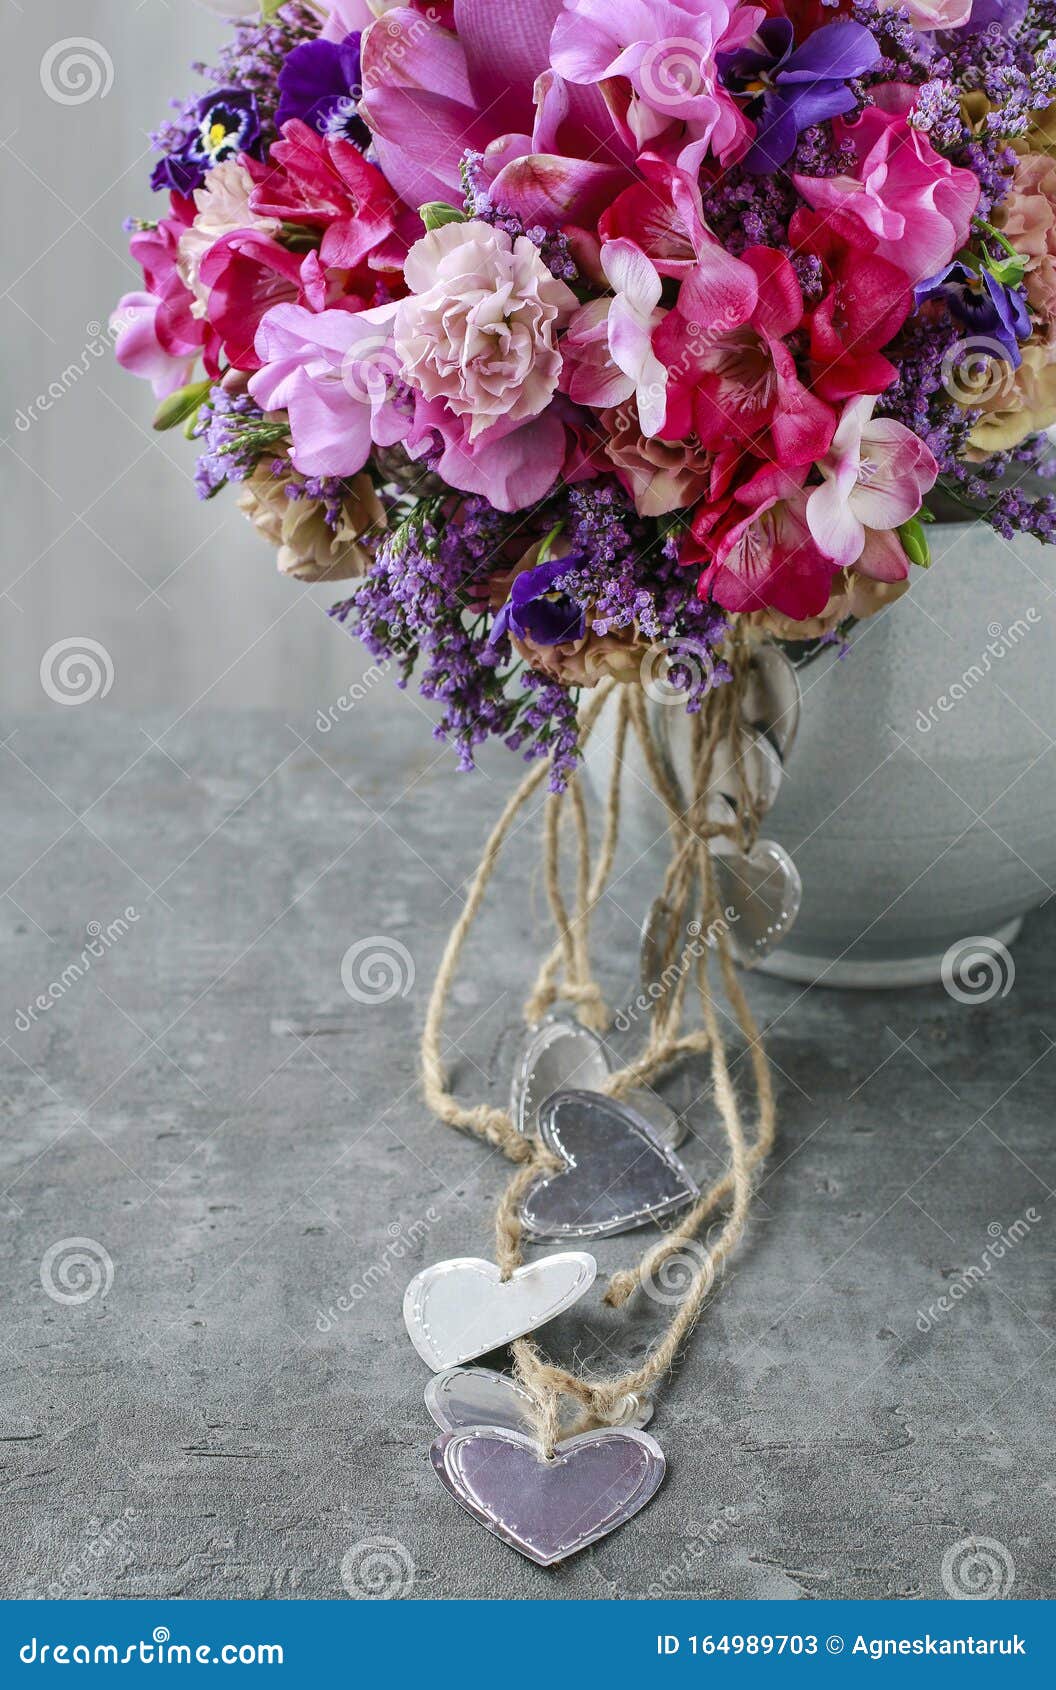 Bouquet Of Carnation Freesia And Pansy Flowers Stock Image Image Of Lovely Bridesmaid 164989703